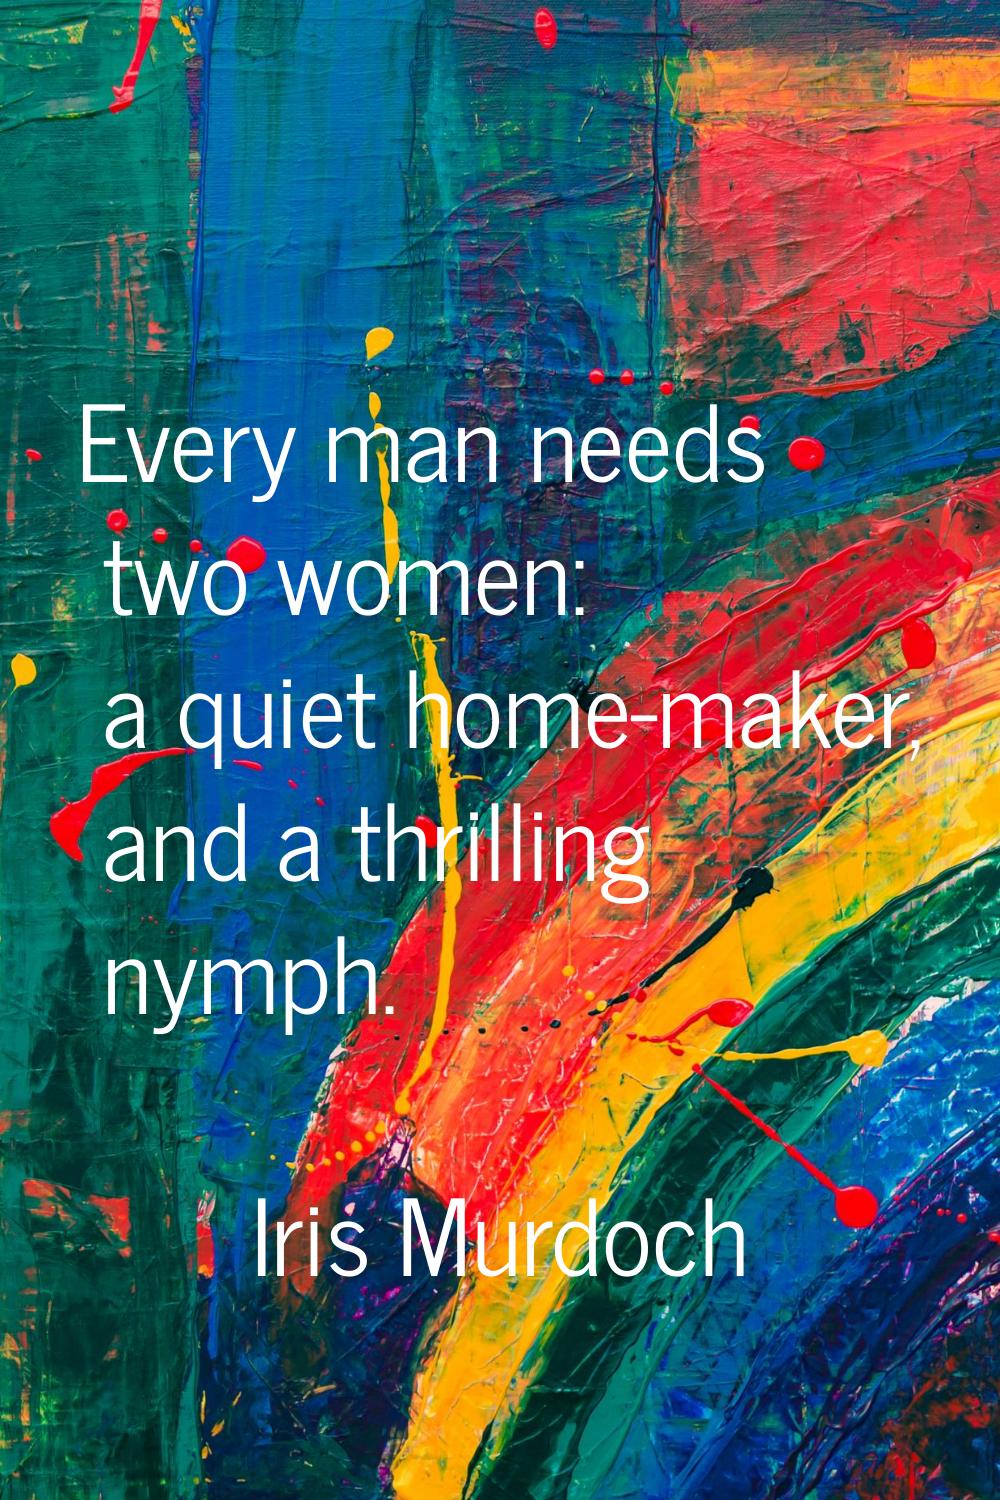 Every man needs two women: a quiet home-maker, and a thrilling nymph.